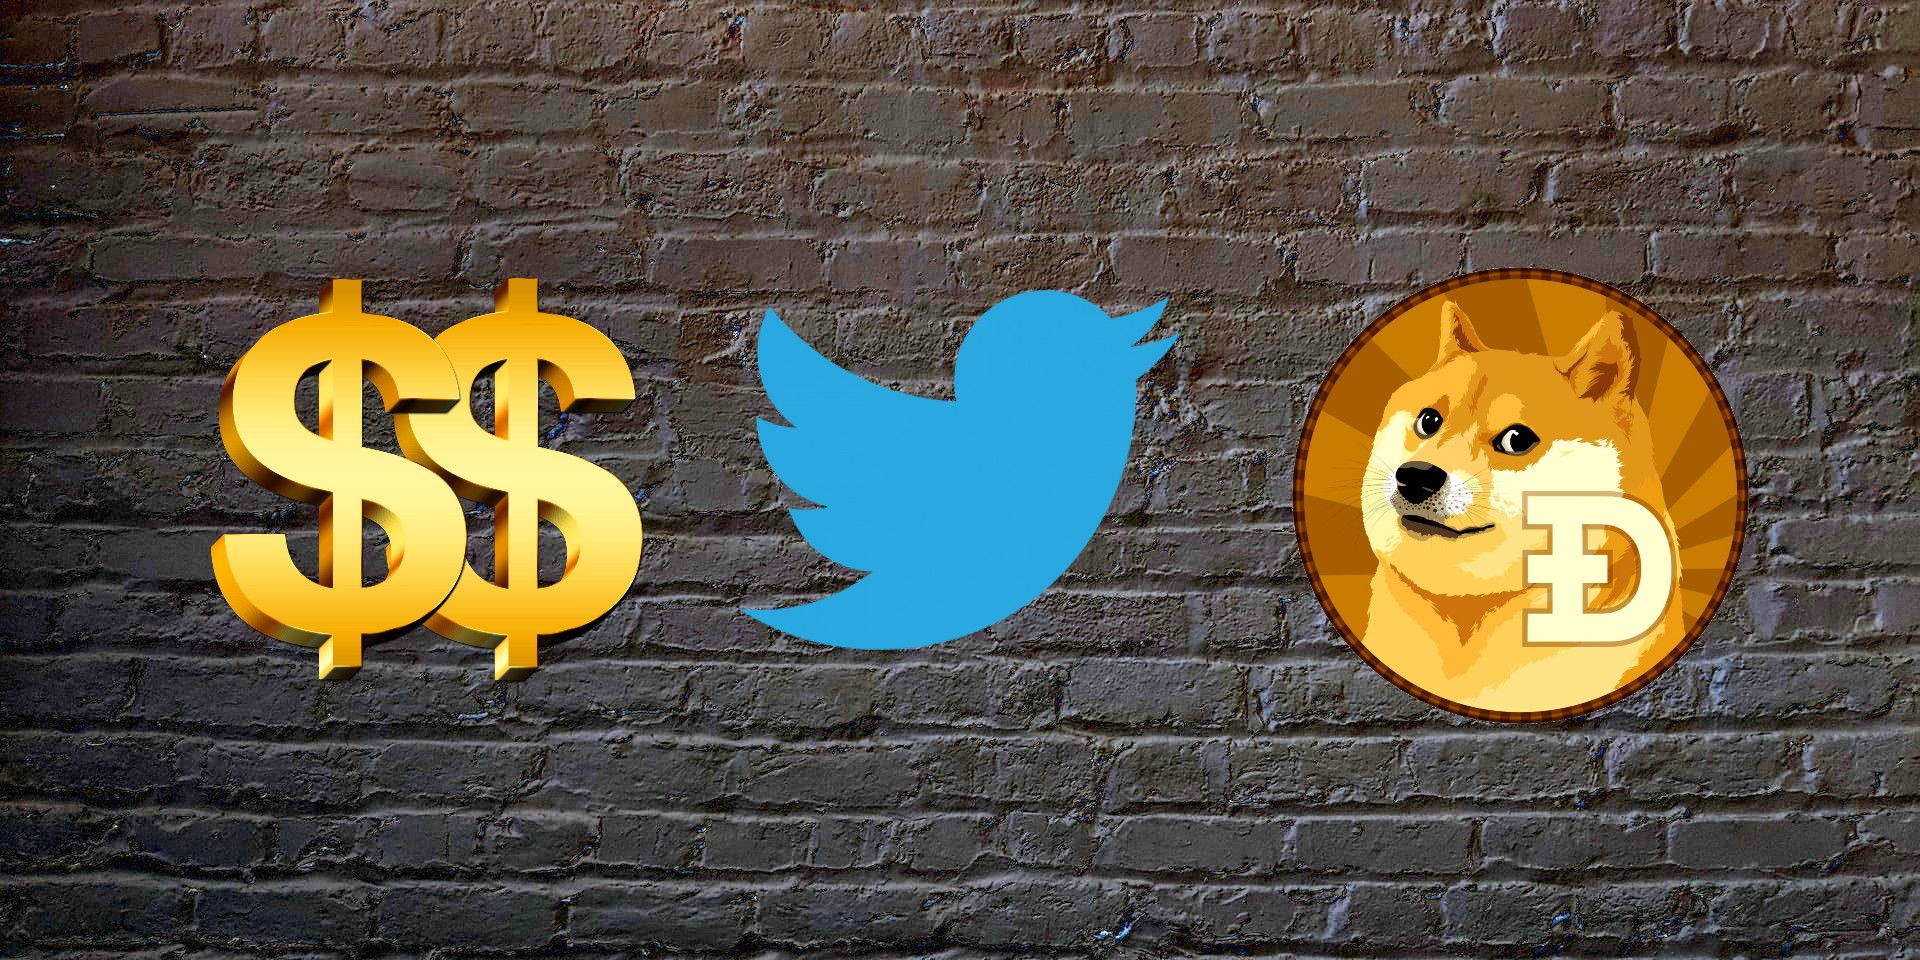 A brick wall background superimposed with a Blue Twitter logo in the middle, with a Dogecoin on the right and a double dollar sign on the left